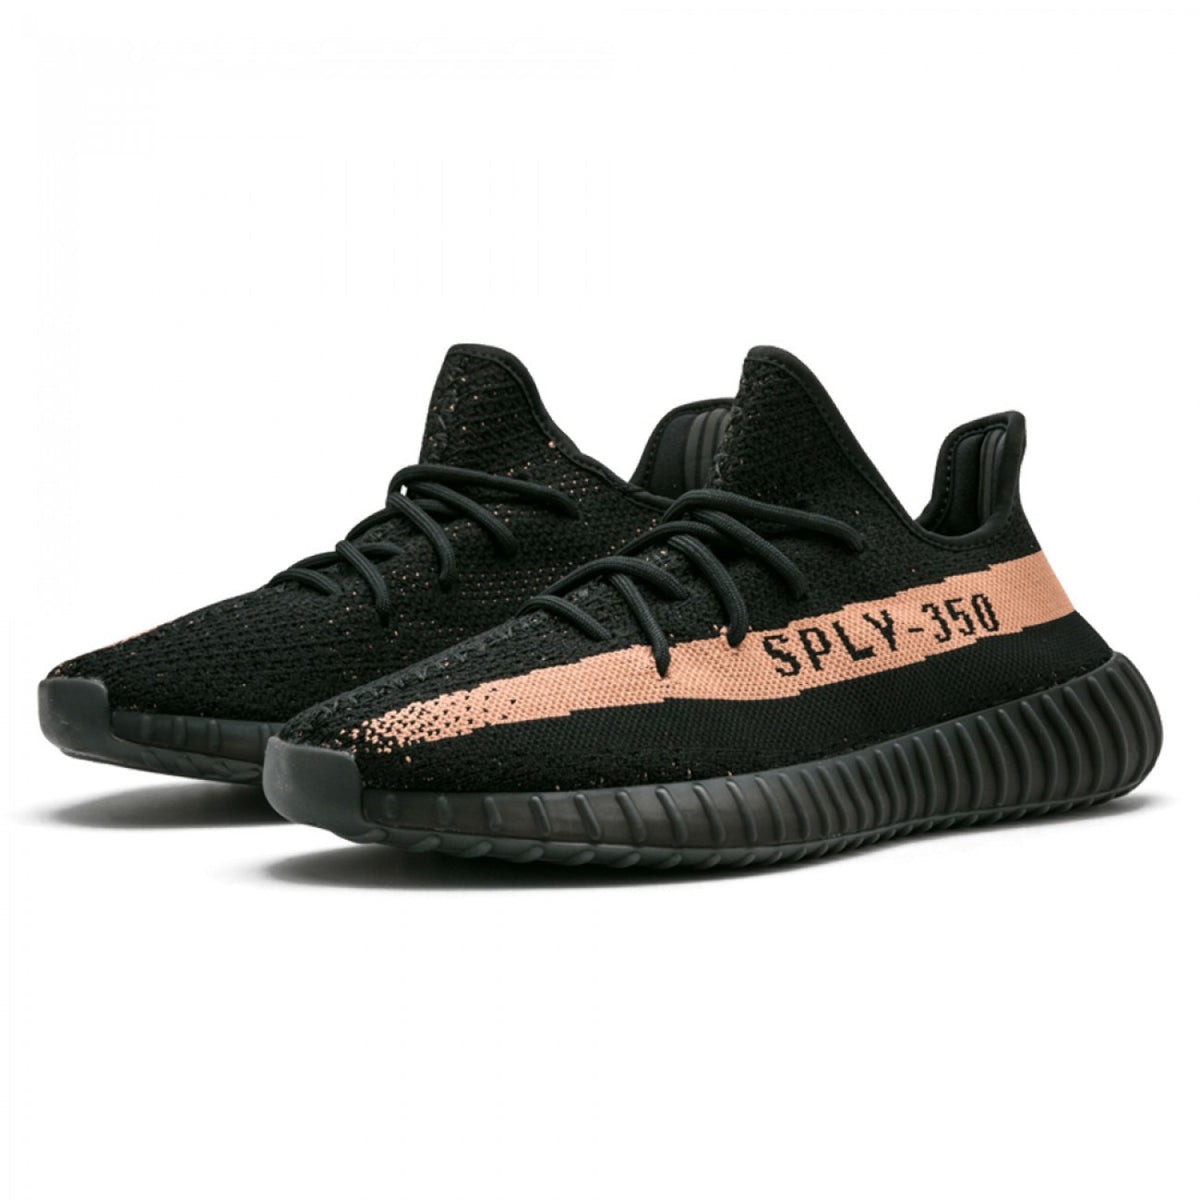 Adidas Yeezy Boost 350 V2 Copper – Soldsoles